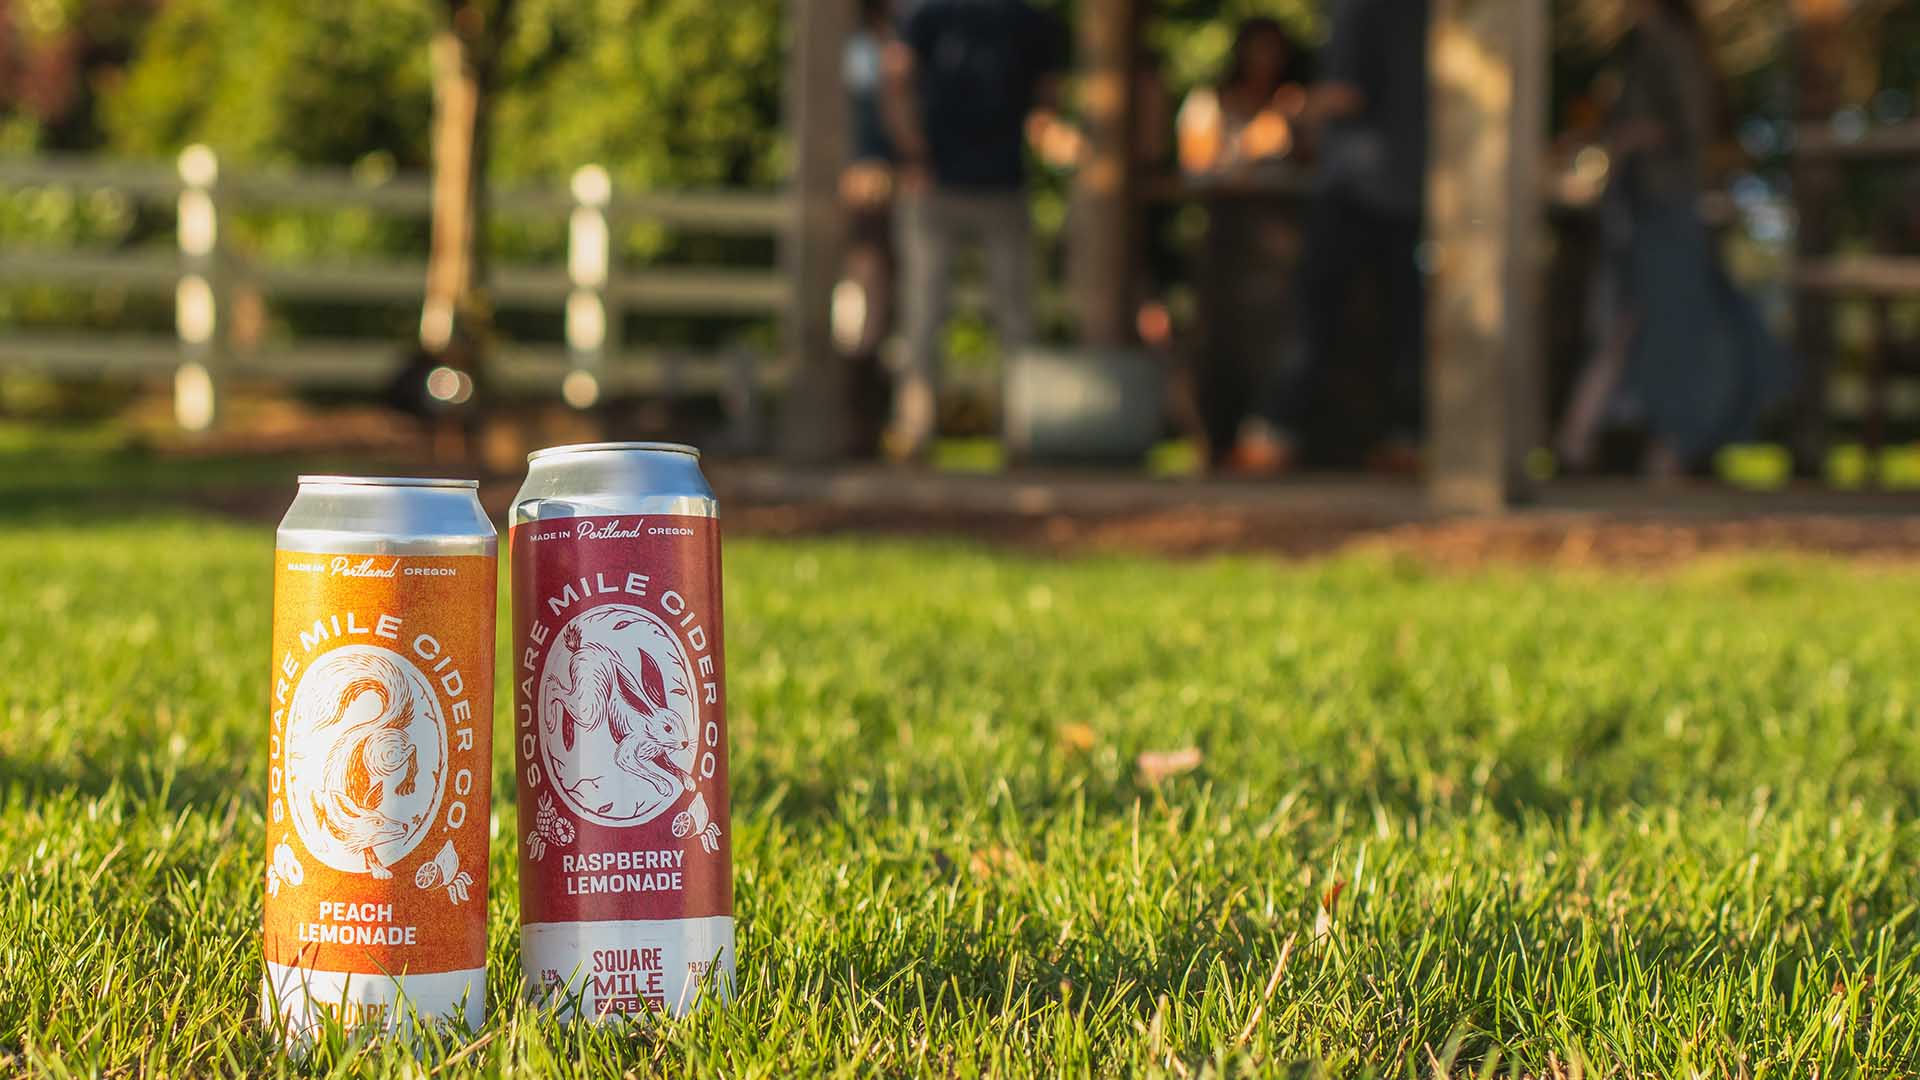 Two cans of Square Mile Cider standing in green grass, with a group of friends around an outdoor table in the blurred background